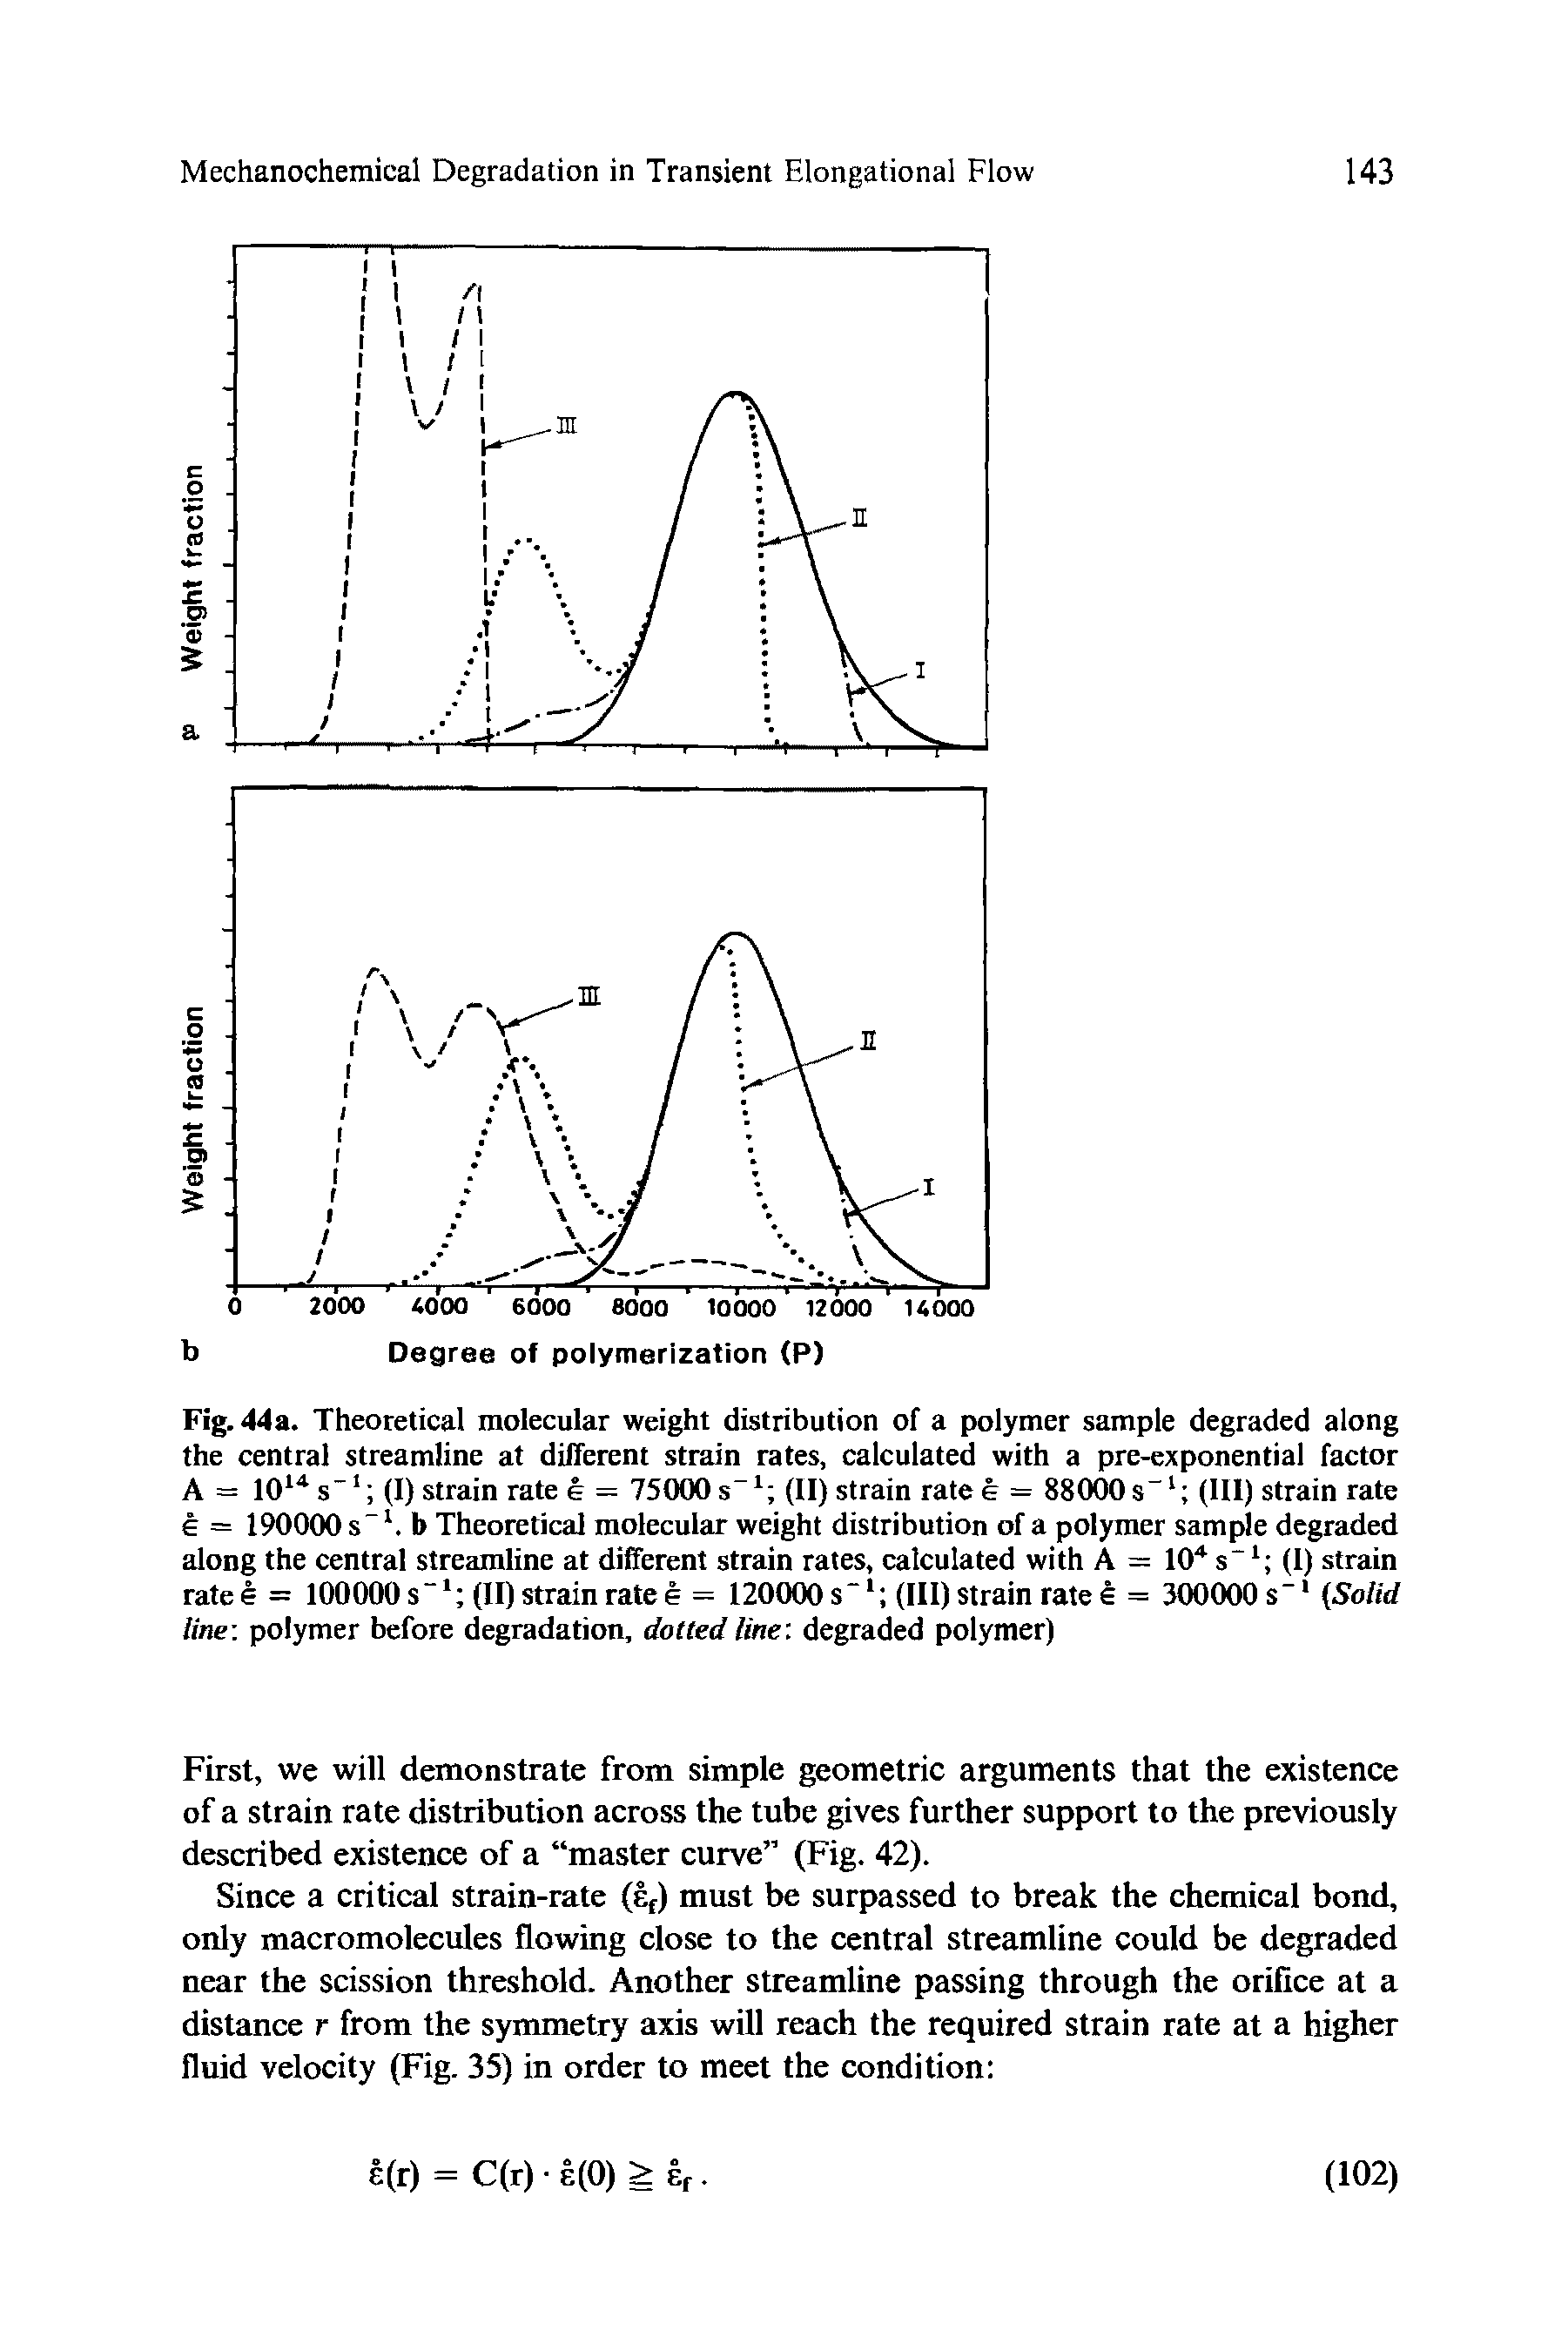 Fig. 44a. Theoretical molecular weight distribution of a polymer sample degraded along the central streamline at different strain rates, calculated with a pre-exponential factor A = 1014s-1 (I) strain rate e = 75000s-1 (II) strain rate e = 88000s-1 (III) strain rate e = 190000 s- b Theoretical molecular weight distribution of a polymer sample degraded along the central streamline at different strain rates, calculated with A = 104 s-1 (I) strain rate e = 100000 s -1 (II) strain rate e = 120000 s 1 (III) strain rate e = 300000 s -1 (Solid line polymer before degradation, dotted line, degraded polymer)...